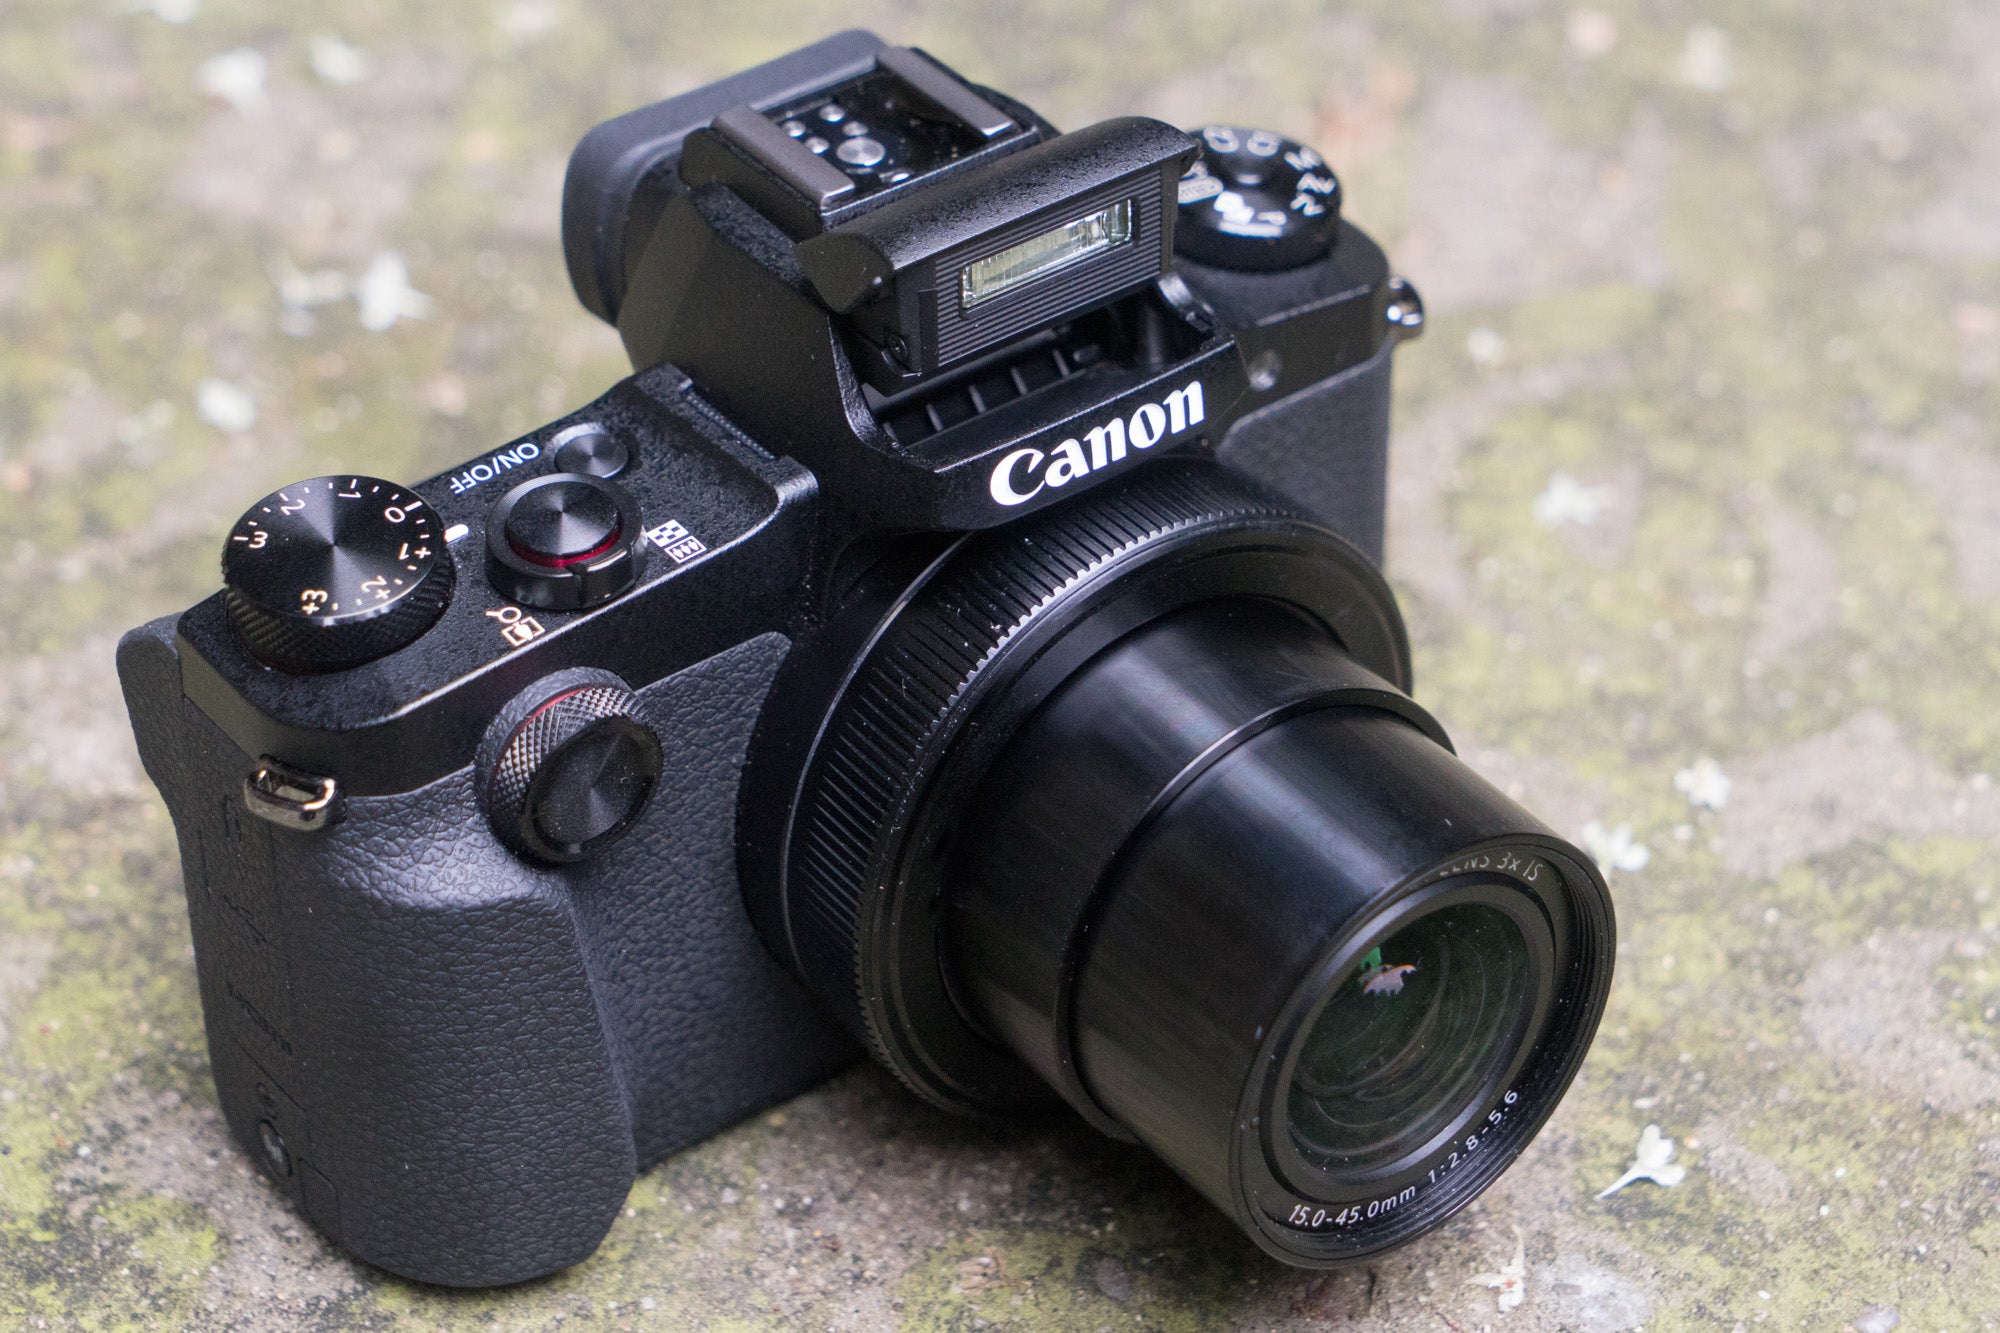 Canon G1X Mark III Review | Trusted Reviews